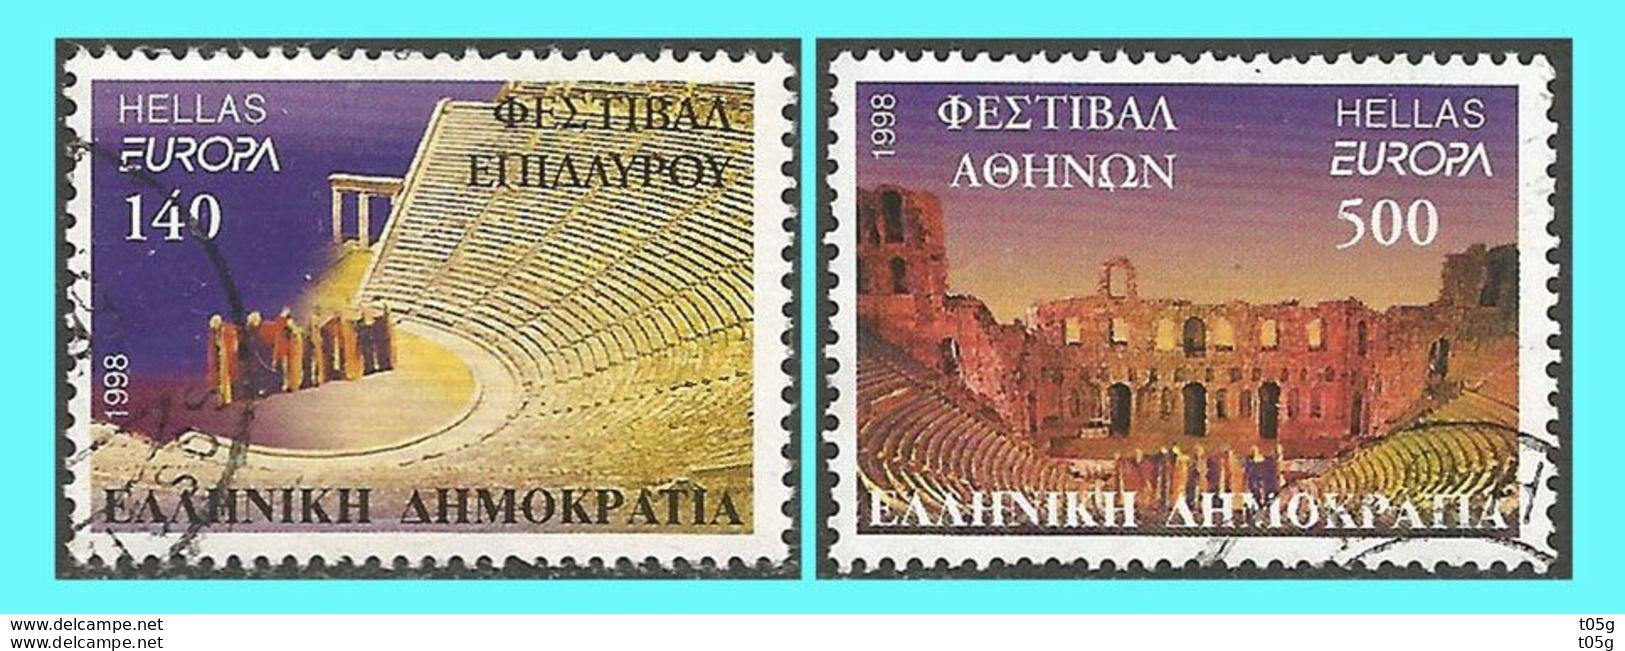 Greece-Grece  - Hellas 1998: Europa CERT - Complet Set Used - Used Stamps